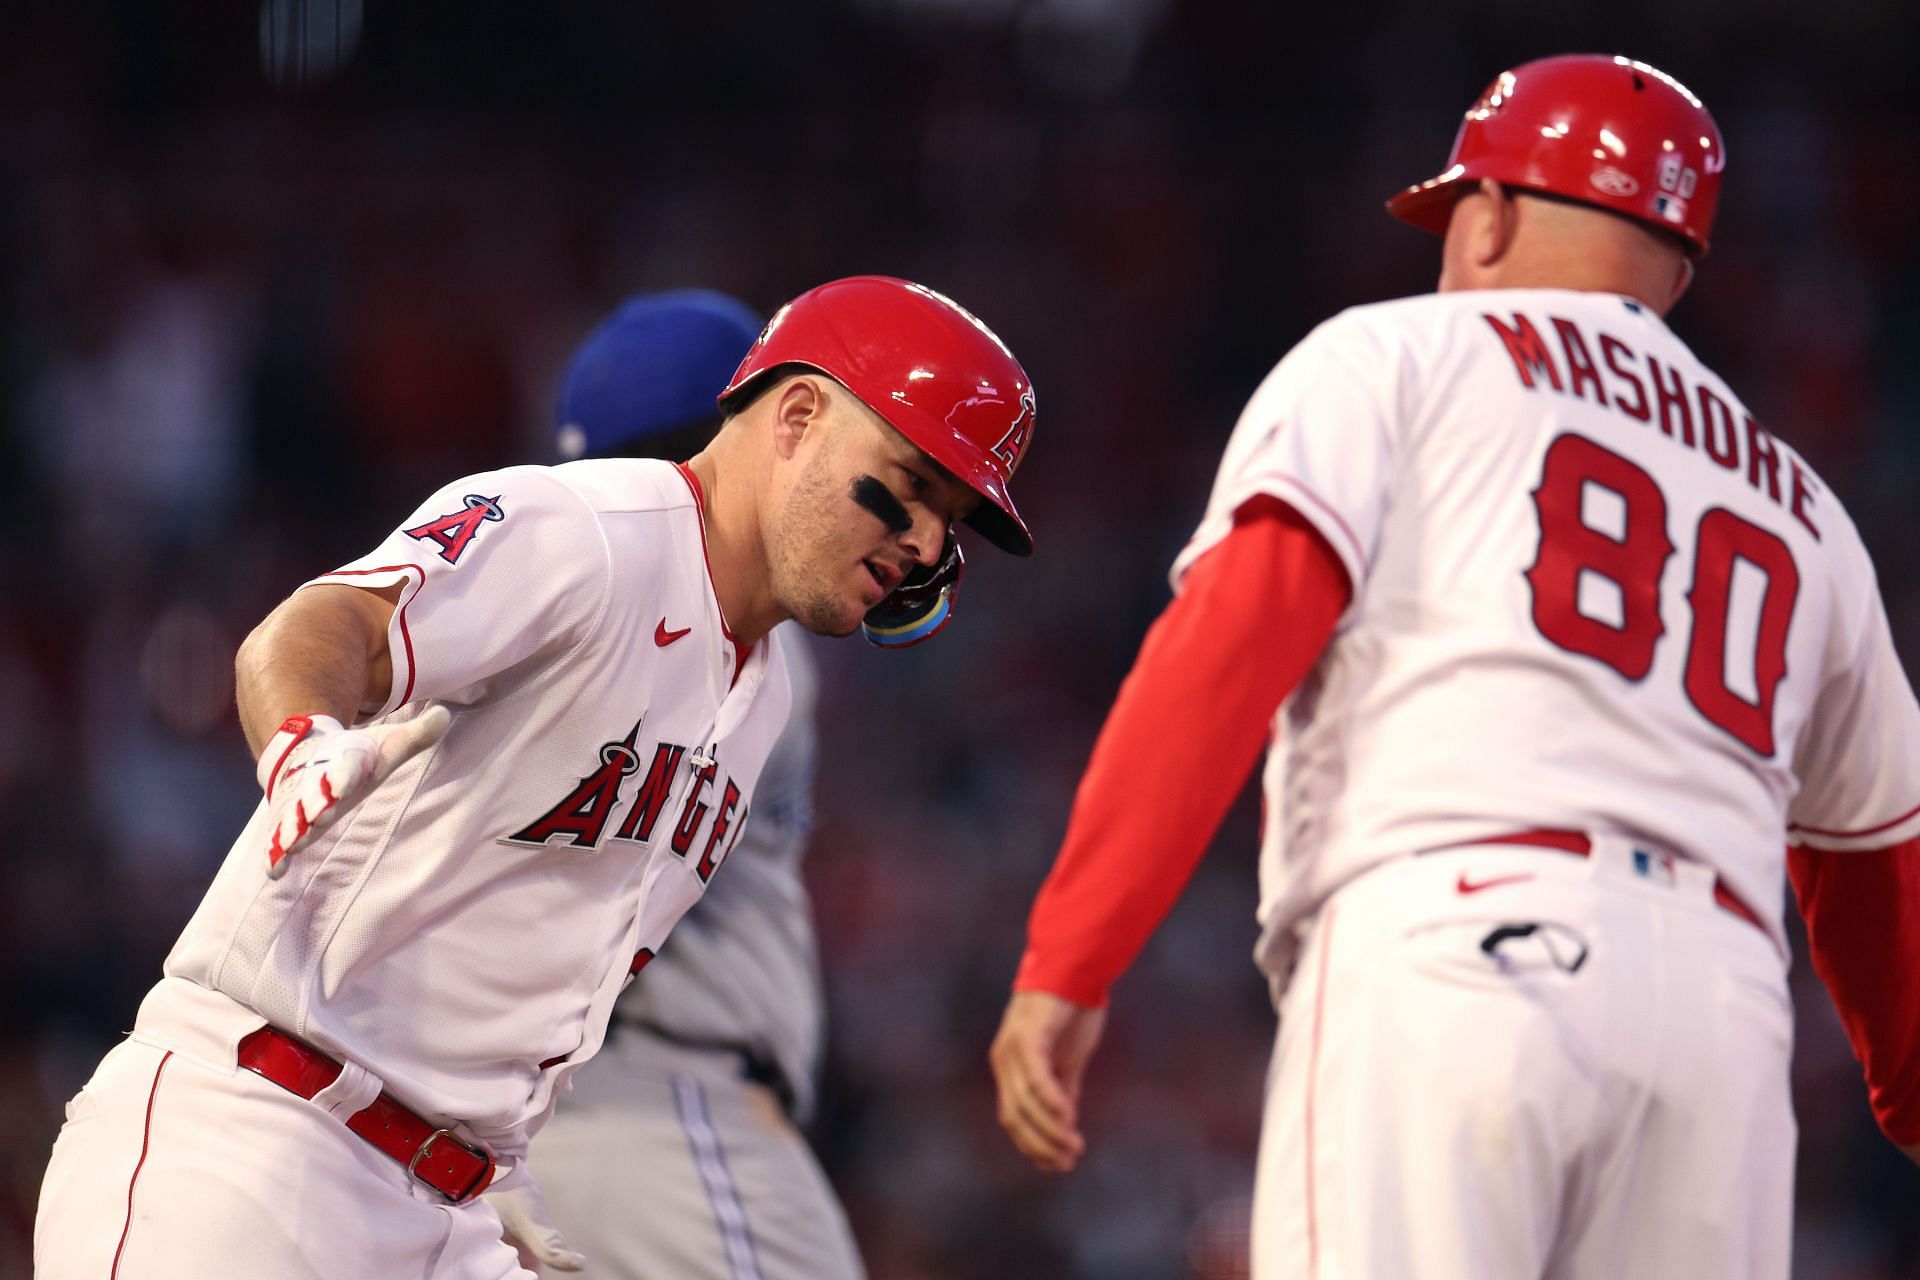 Mike Trout of the Los Angeles Angels celebrates his homerun with Damon Mashore at Angel Stadium of Anaheim